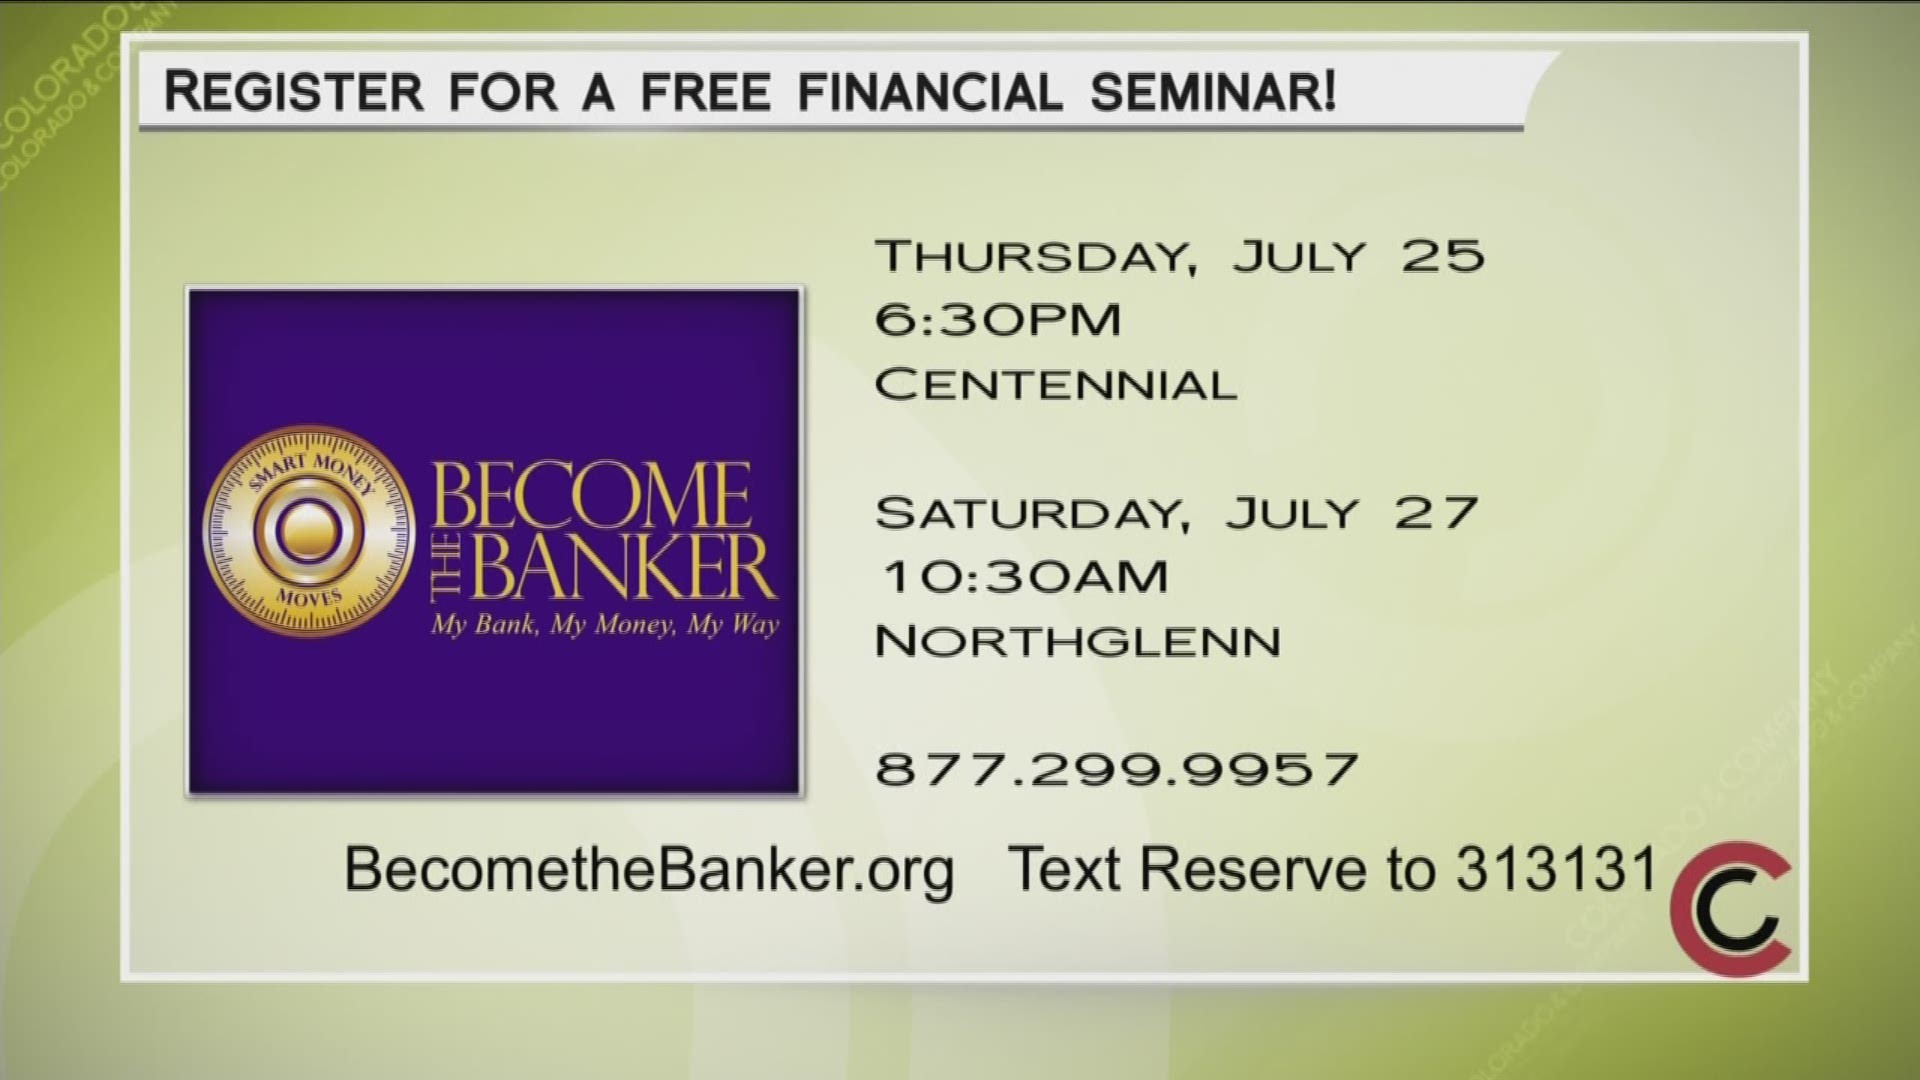 Start your journey to financial freedom by signing up for a free financial seminar with Become the Banker. There are two dates coming up: Thursday, July 25th in Centennial, or Saturday, July 27th in Northglenn. Register now by calling 877.299.9957, or text RESERVE to 313131. Learn more at www.BecomeTheBanker.org. 
THIS INTERVIEW HAS COMMERCIAL CONTENT. PRODUCTS AND SERVICES FEATURED APPEAR AS PAID ADVERTISING.